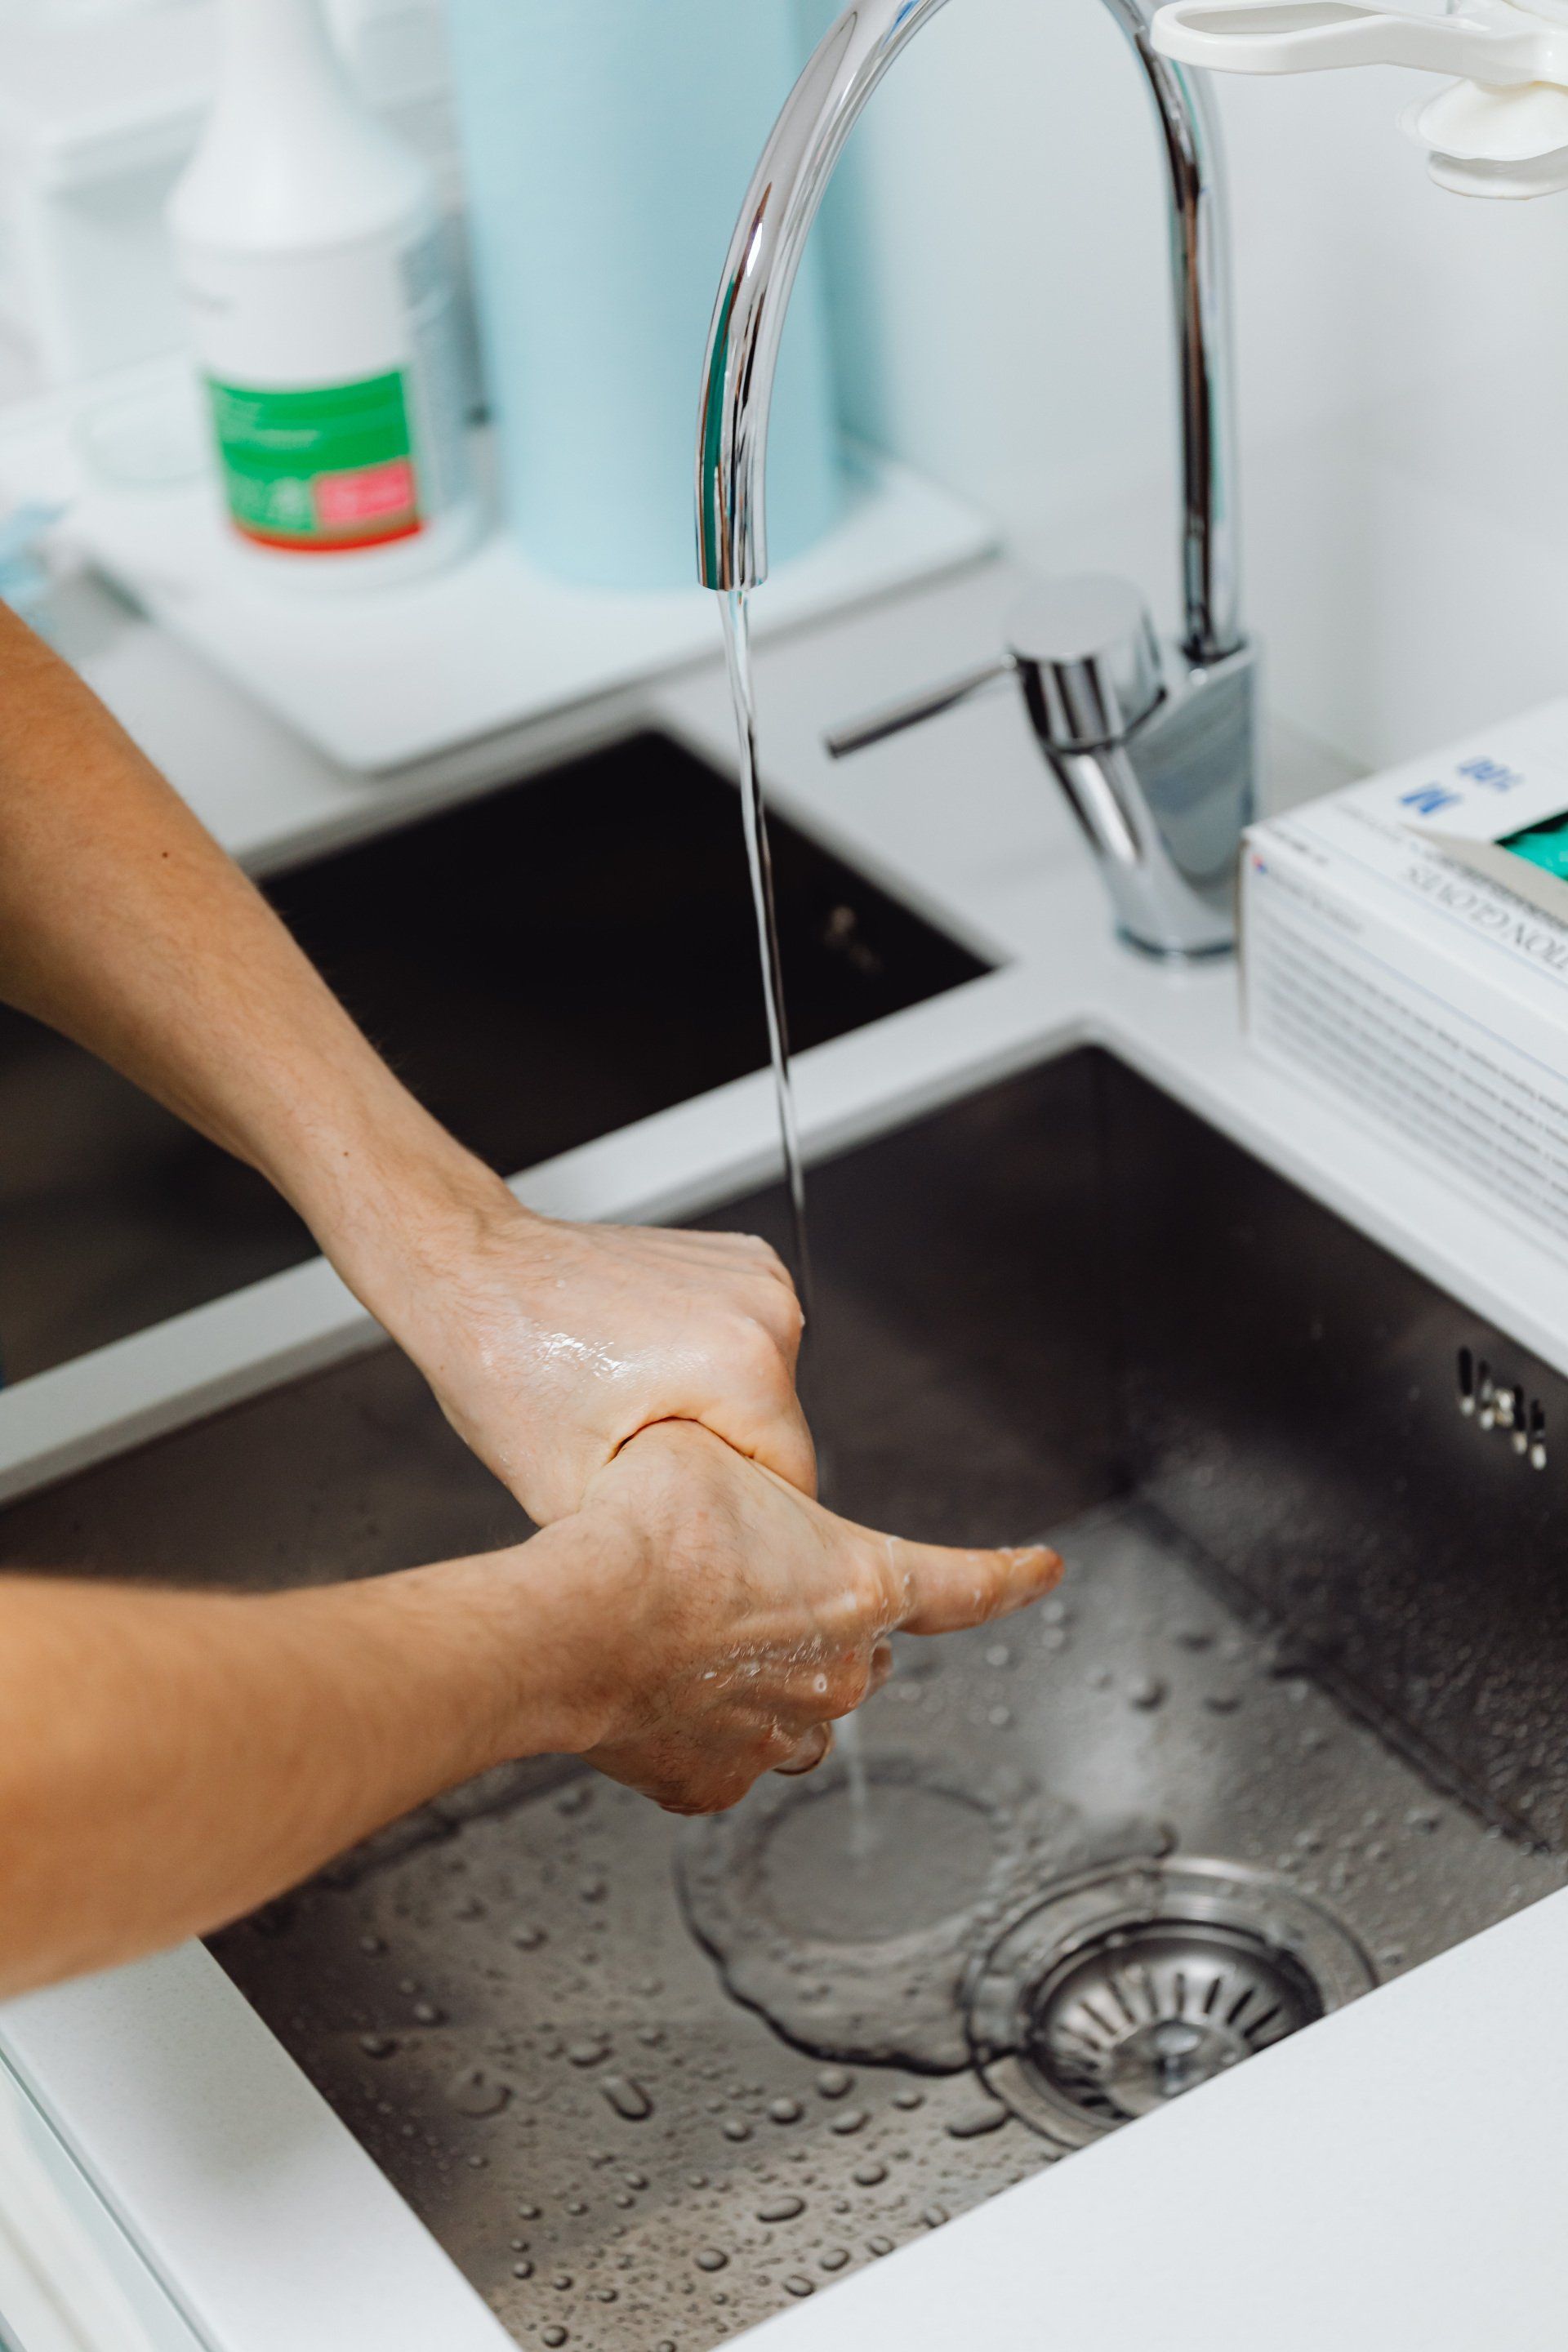 Learn how to prevent clogged drains with these simple tips from our plumbing experts.